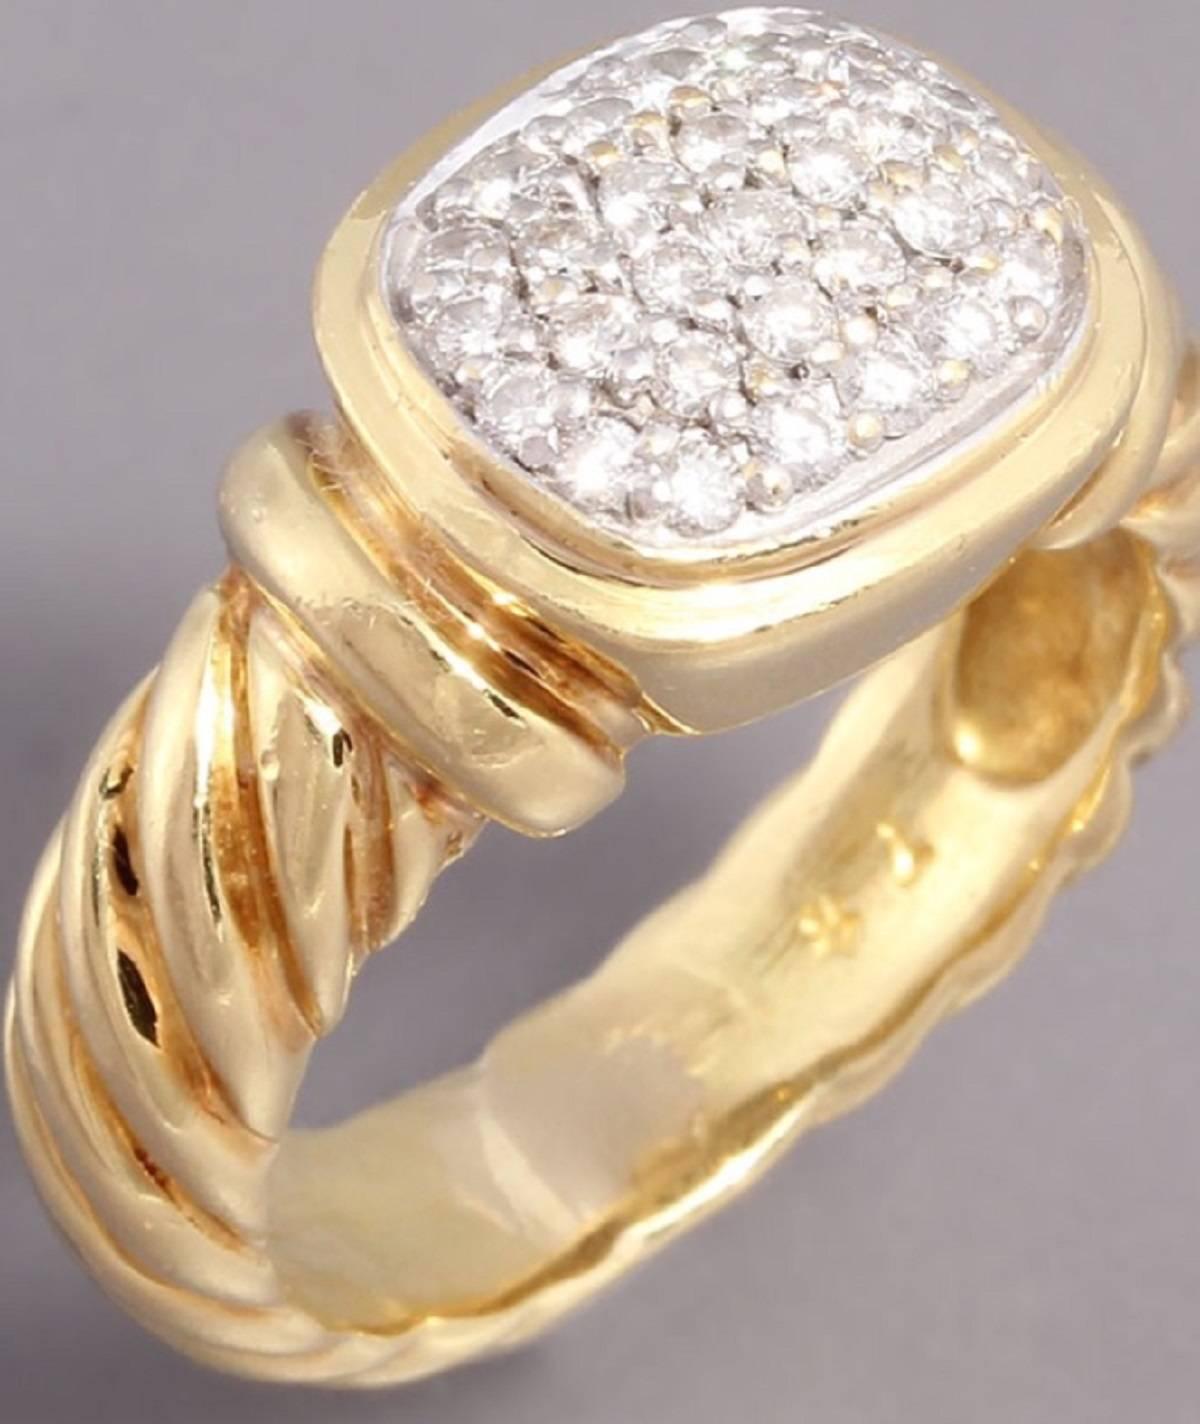 Absolutely Stunning Signed David Yurman Noblesse Collection Diamond Cocktail Ring Handmade in 18k Yellow Gold.

Give your jewelry collection a spark of designer sophistication with this gorgeous David Yurman ring! Part of The David Yurman Noblesse